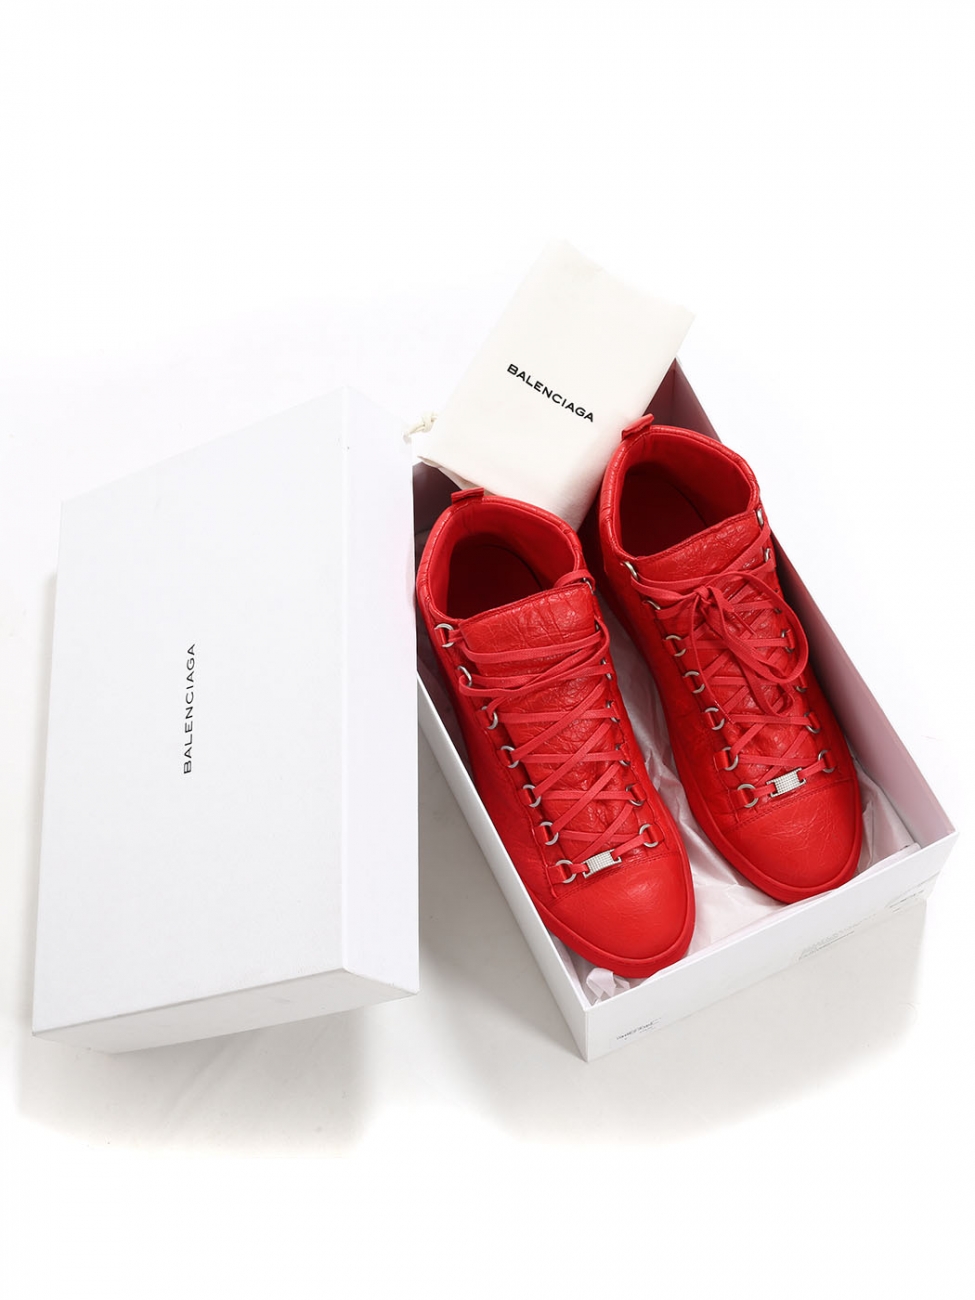 patrulje At redigere sø Boutique BALENCIAGA ARENA Red leather sneakers Retail price $645 Size 44